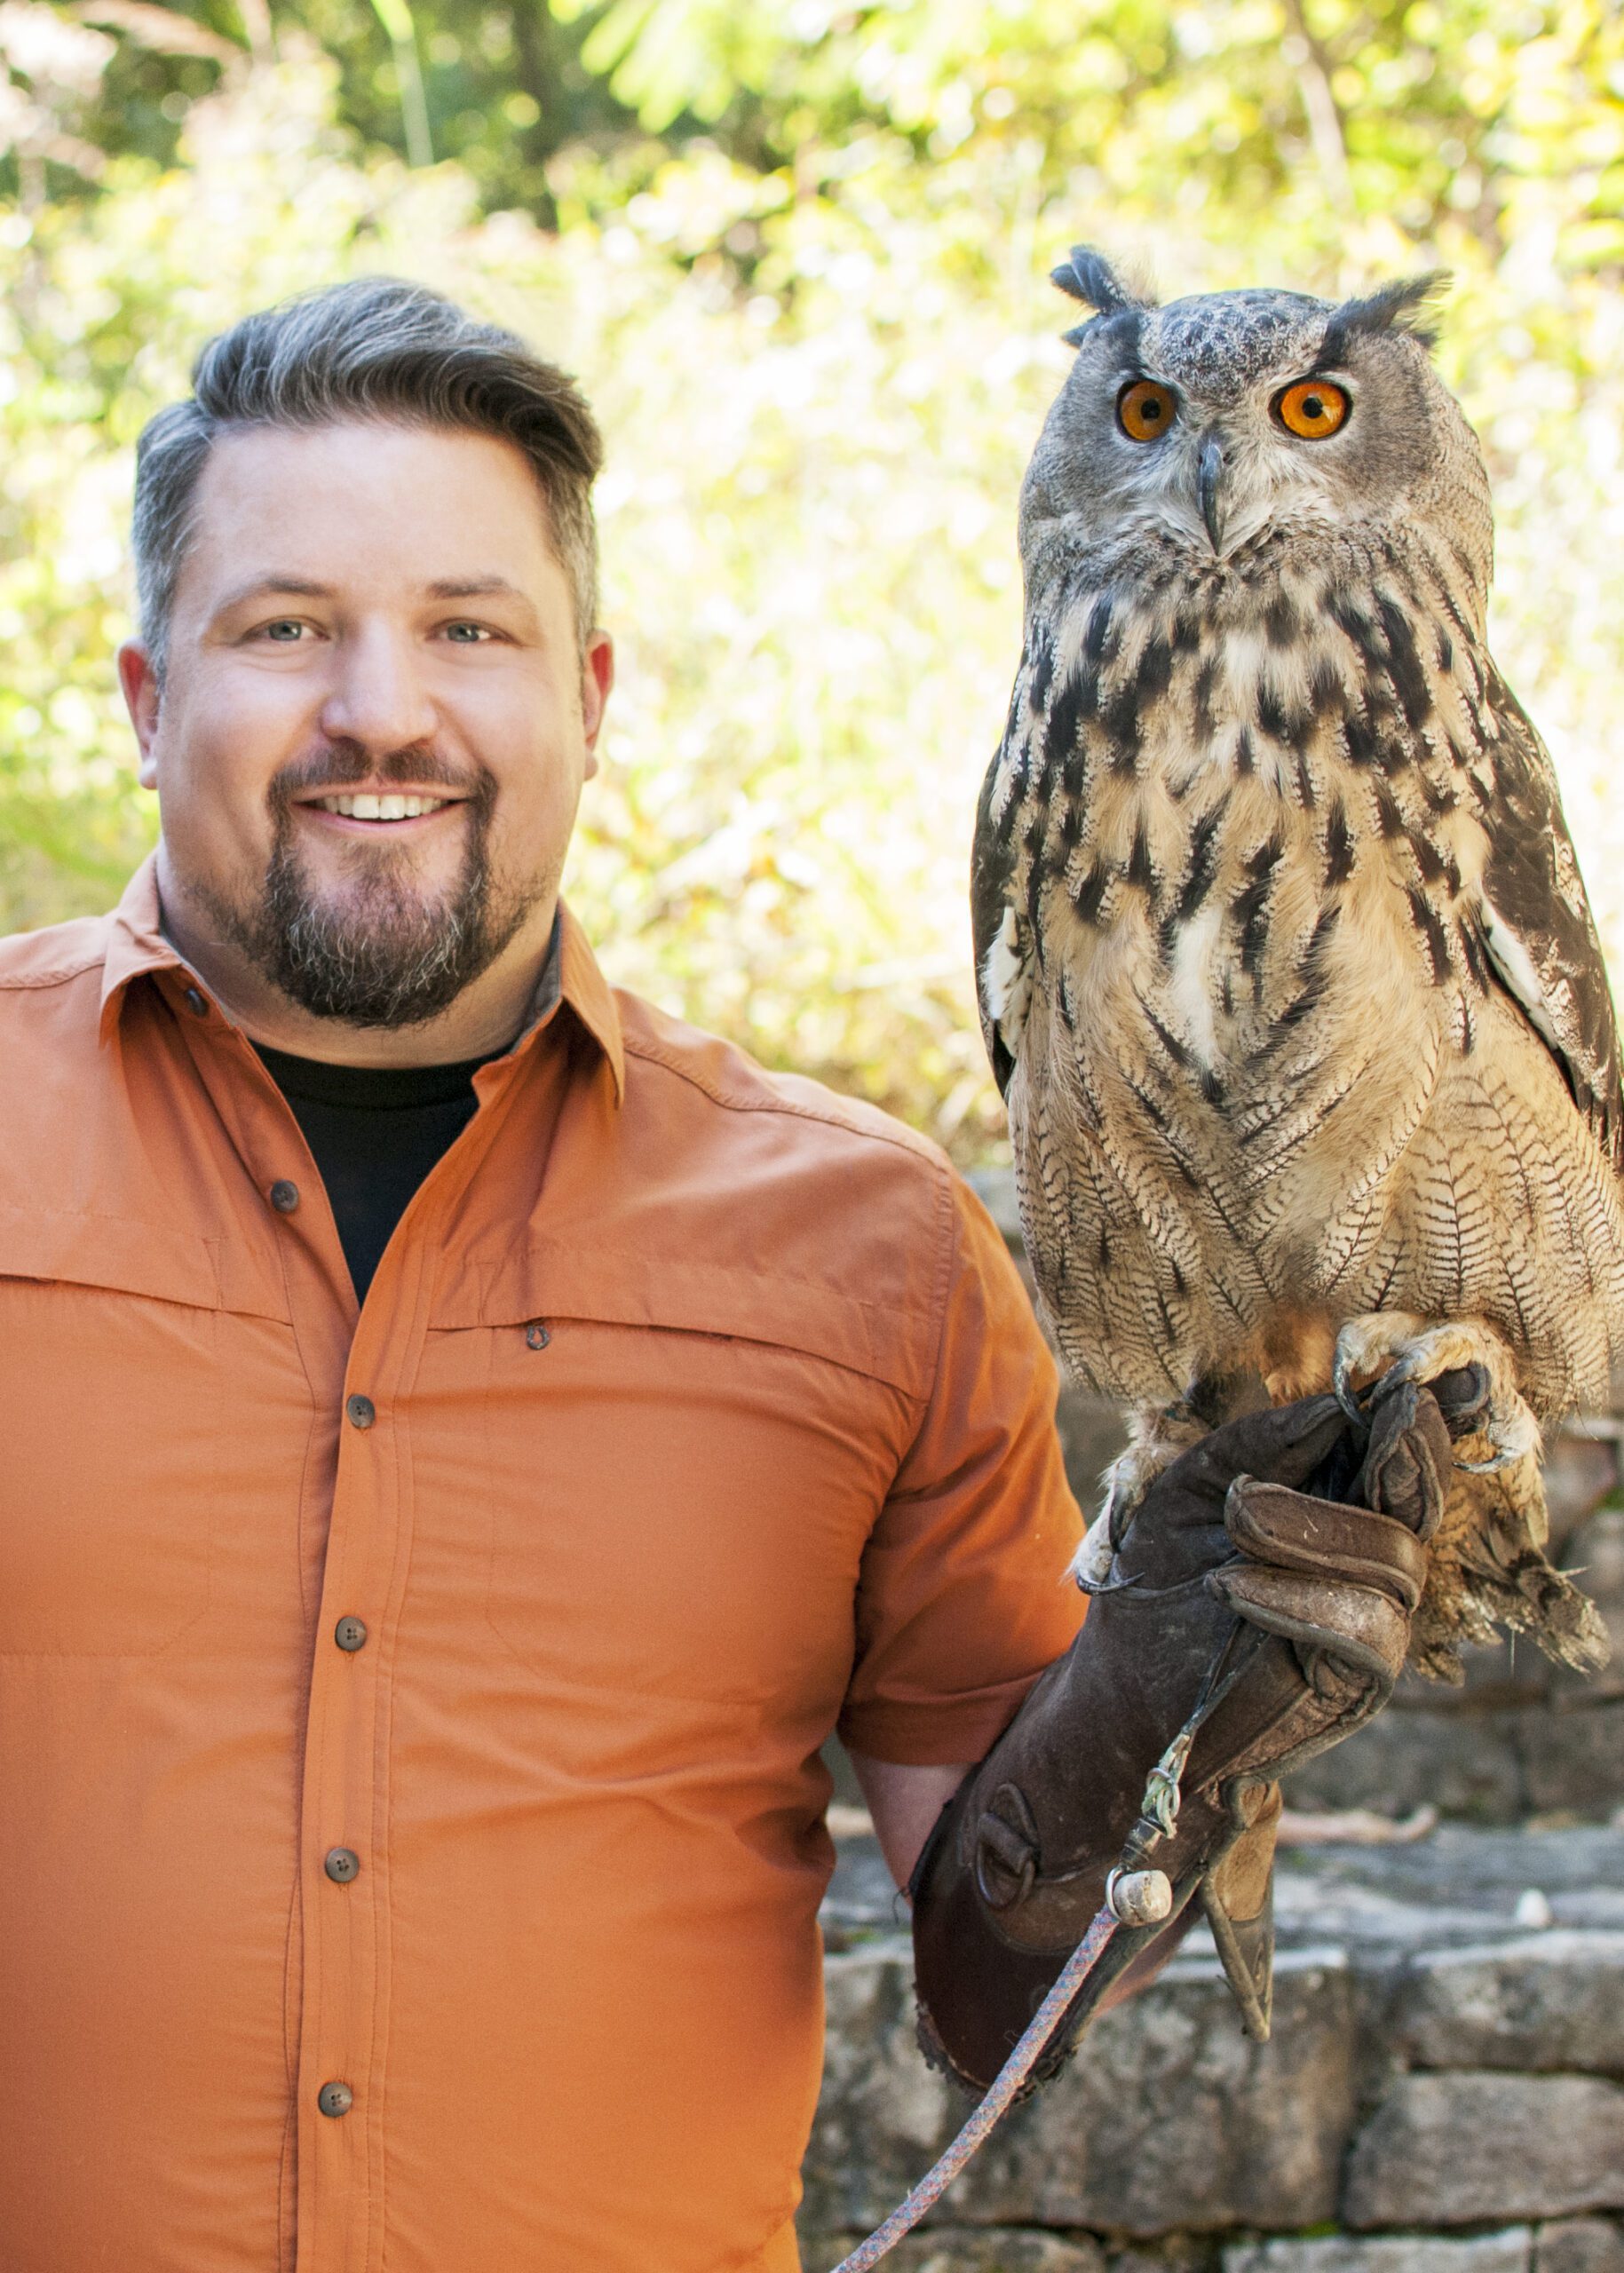 NWF naturalist David Mizejewski with an an owl perched on his arm.